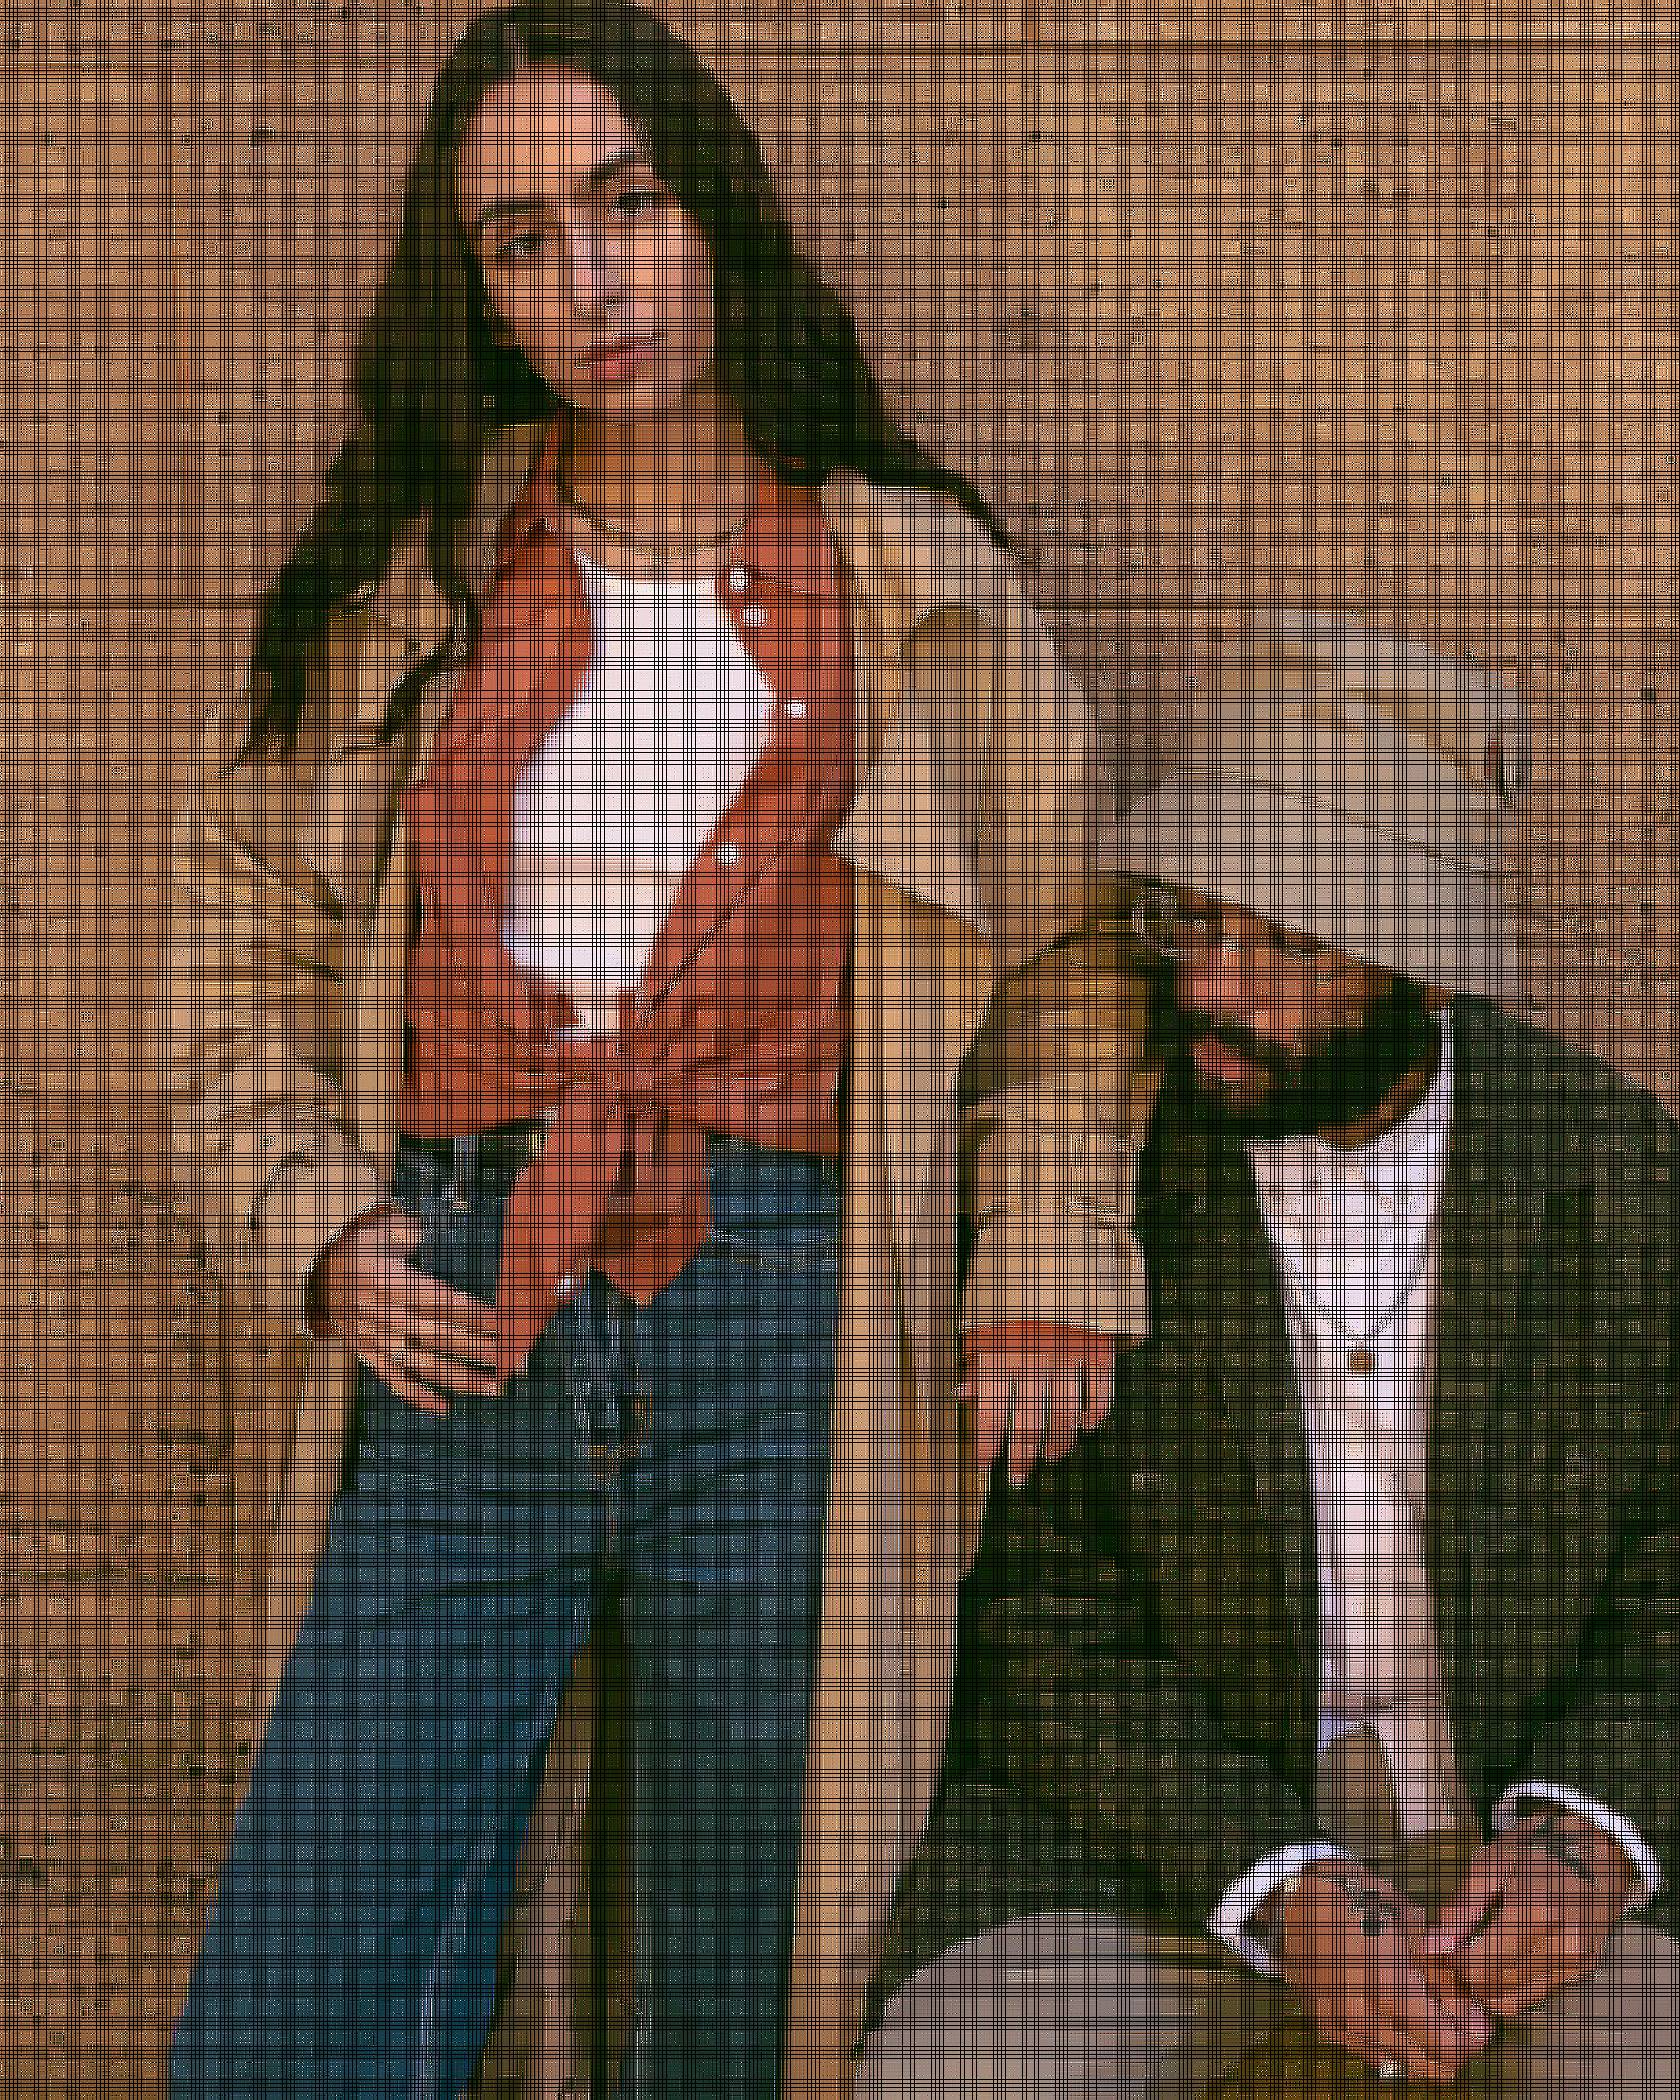 Image of Adeline Hocine and Paul Bellas standing against a brown wall. Adeline is wearing a tan colored trenchcoat, orange blouse, white tank top and blue denim jeans while Paul is wearing a tan colored bucket hat, green camo jacket, white button down shirt and tan colored cargo pants.